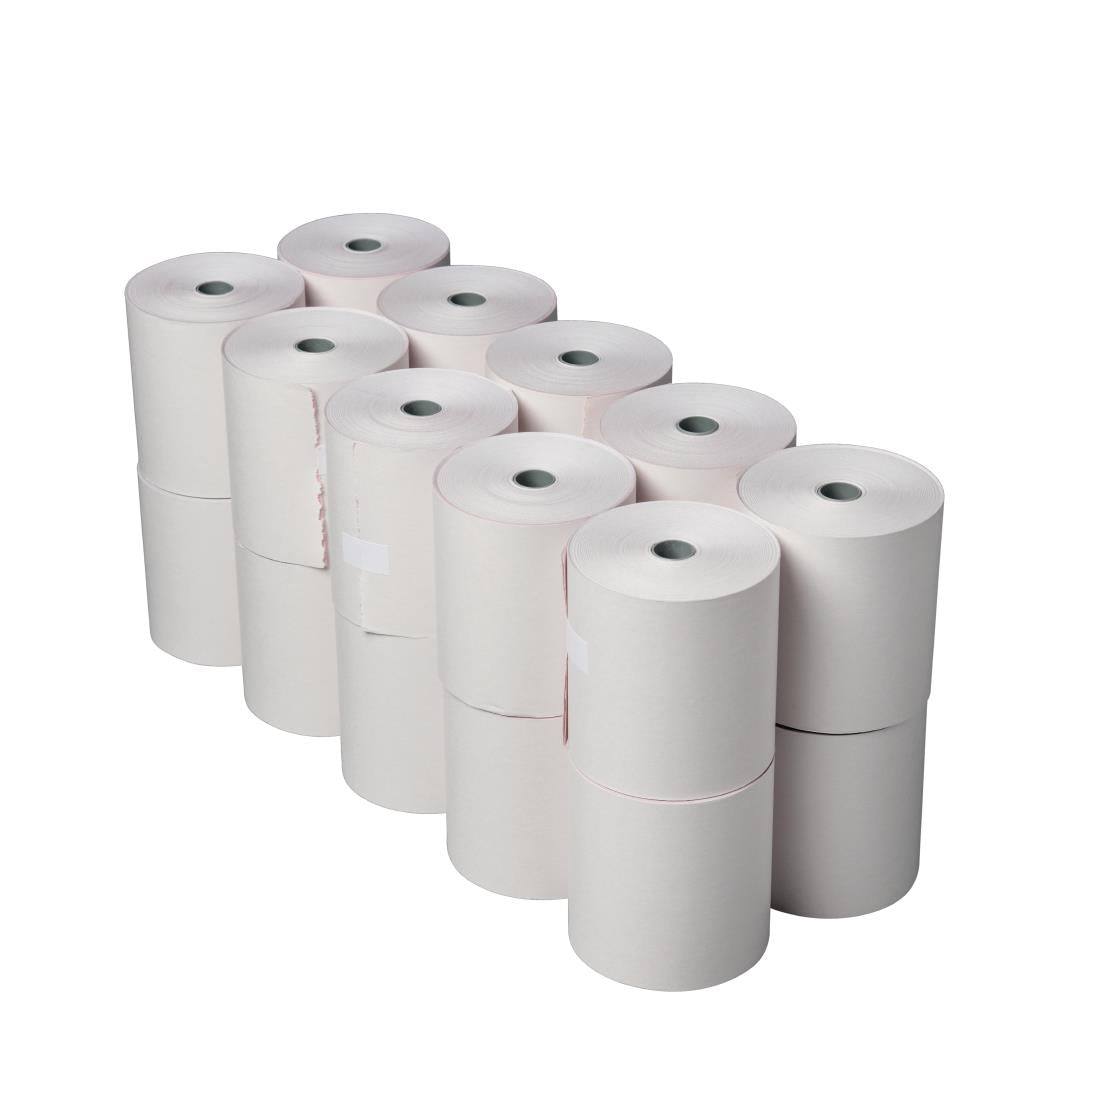 Fiesta Non-Thermal 2ply White and Pink Till Roll 76 x 71mm (Pack of 20) JD Catering Equipment Solutions Ltd